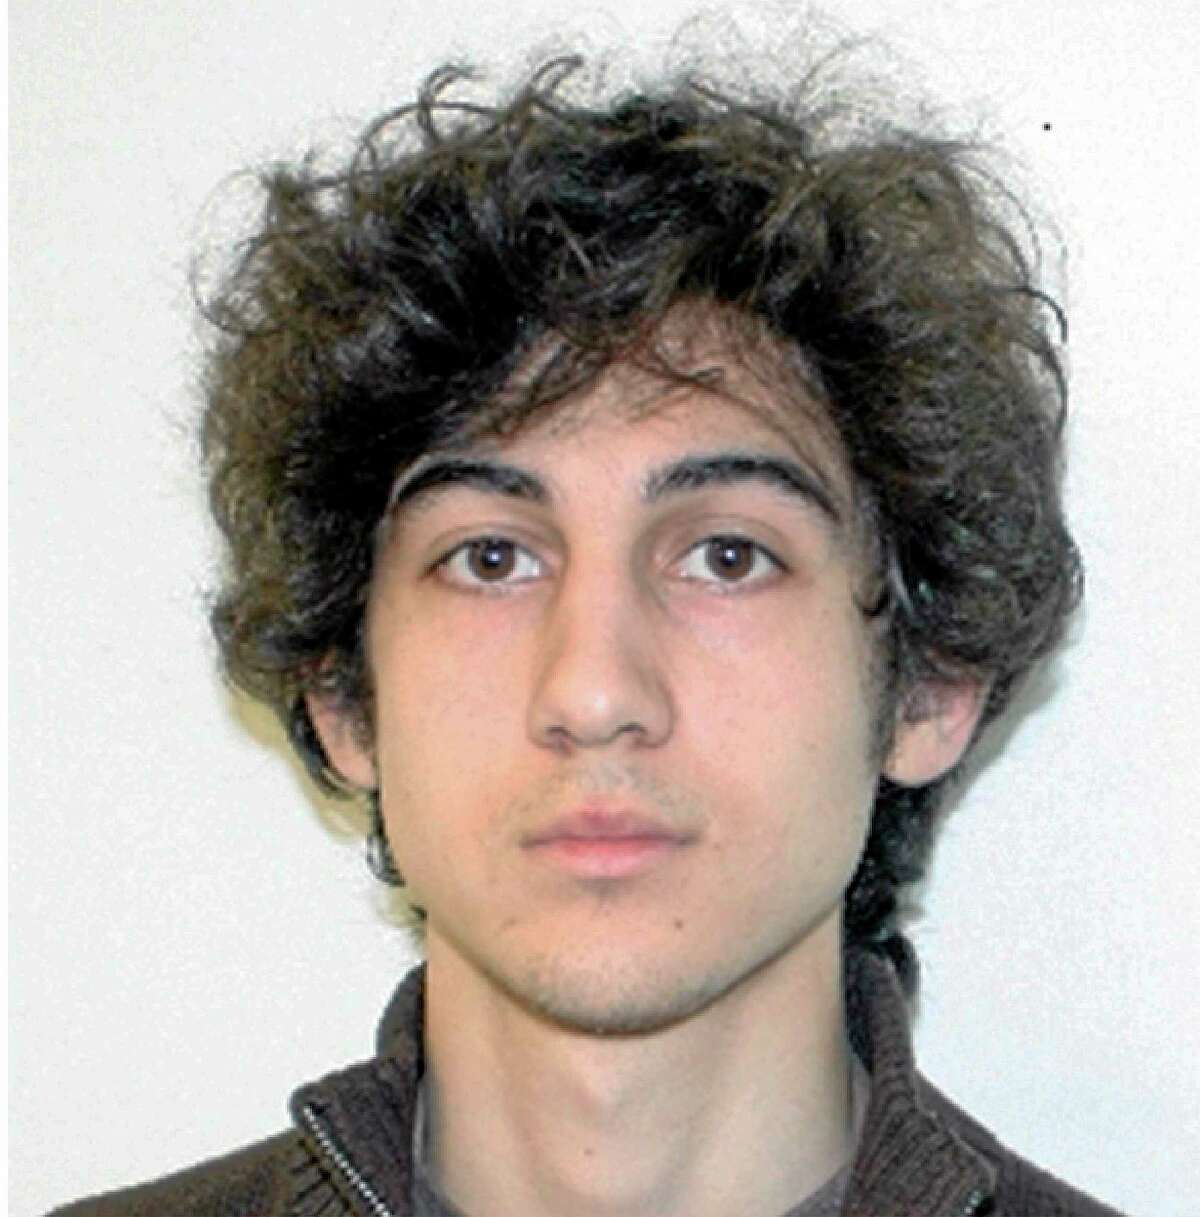 FILE - This file photo provided Friday, April 19, 2013 by the Federal Bureau of Investigation shows Boston Marathon bombing suspect Dzhokhar Tsarnaev. Azamat Tazhayakov, a friend of Tsarnaev, is on trial on obstruction of justice charges, accused with another friend of removing items from Tsarnaev's dorm room. He is not charged with participating in the bombing or knowing about it in advance. (AP Photo/FBI, File)